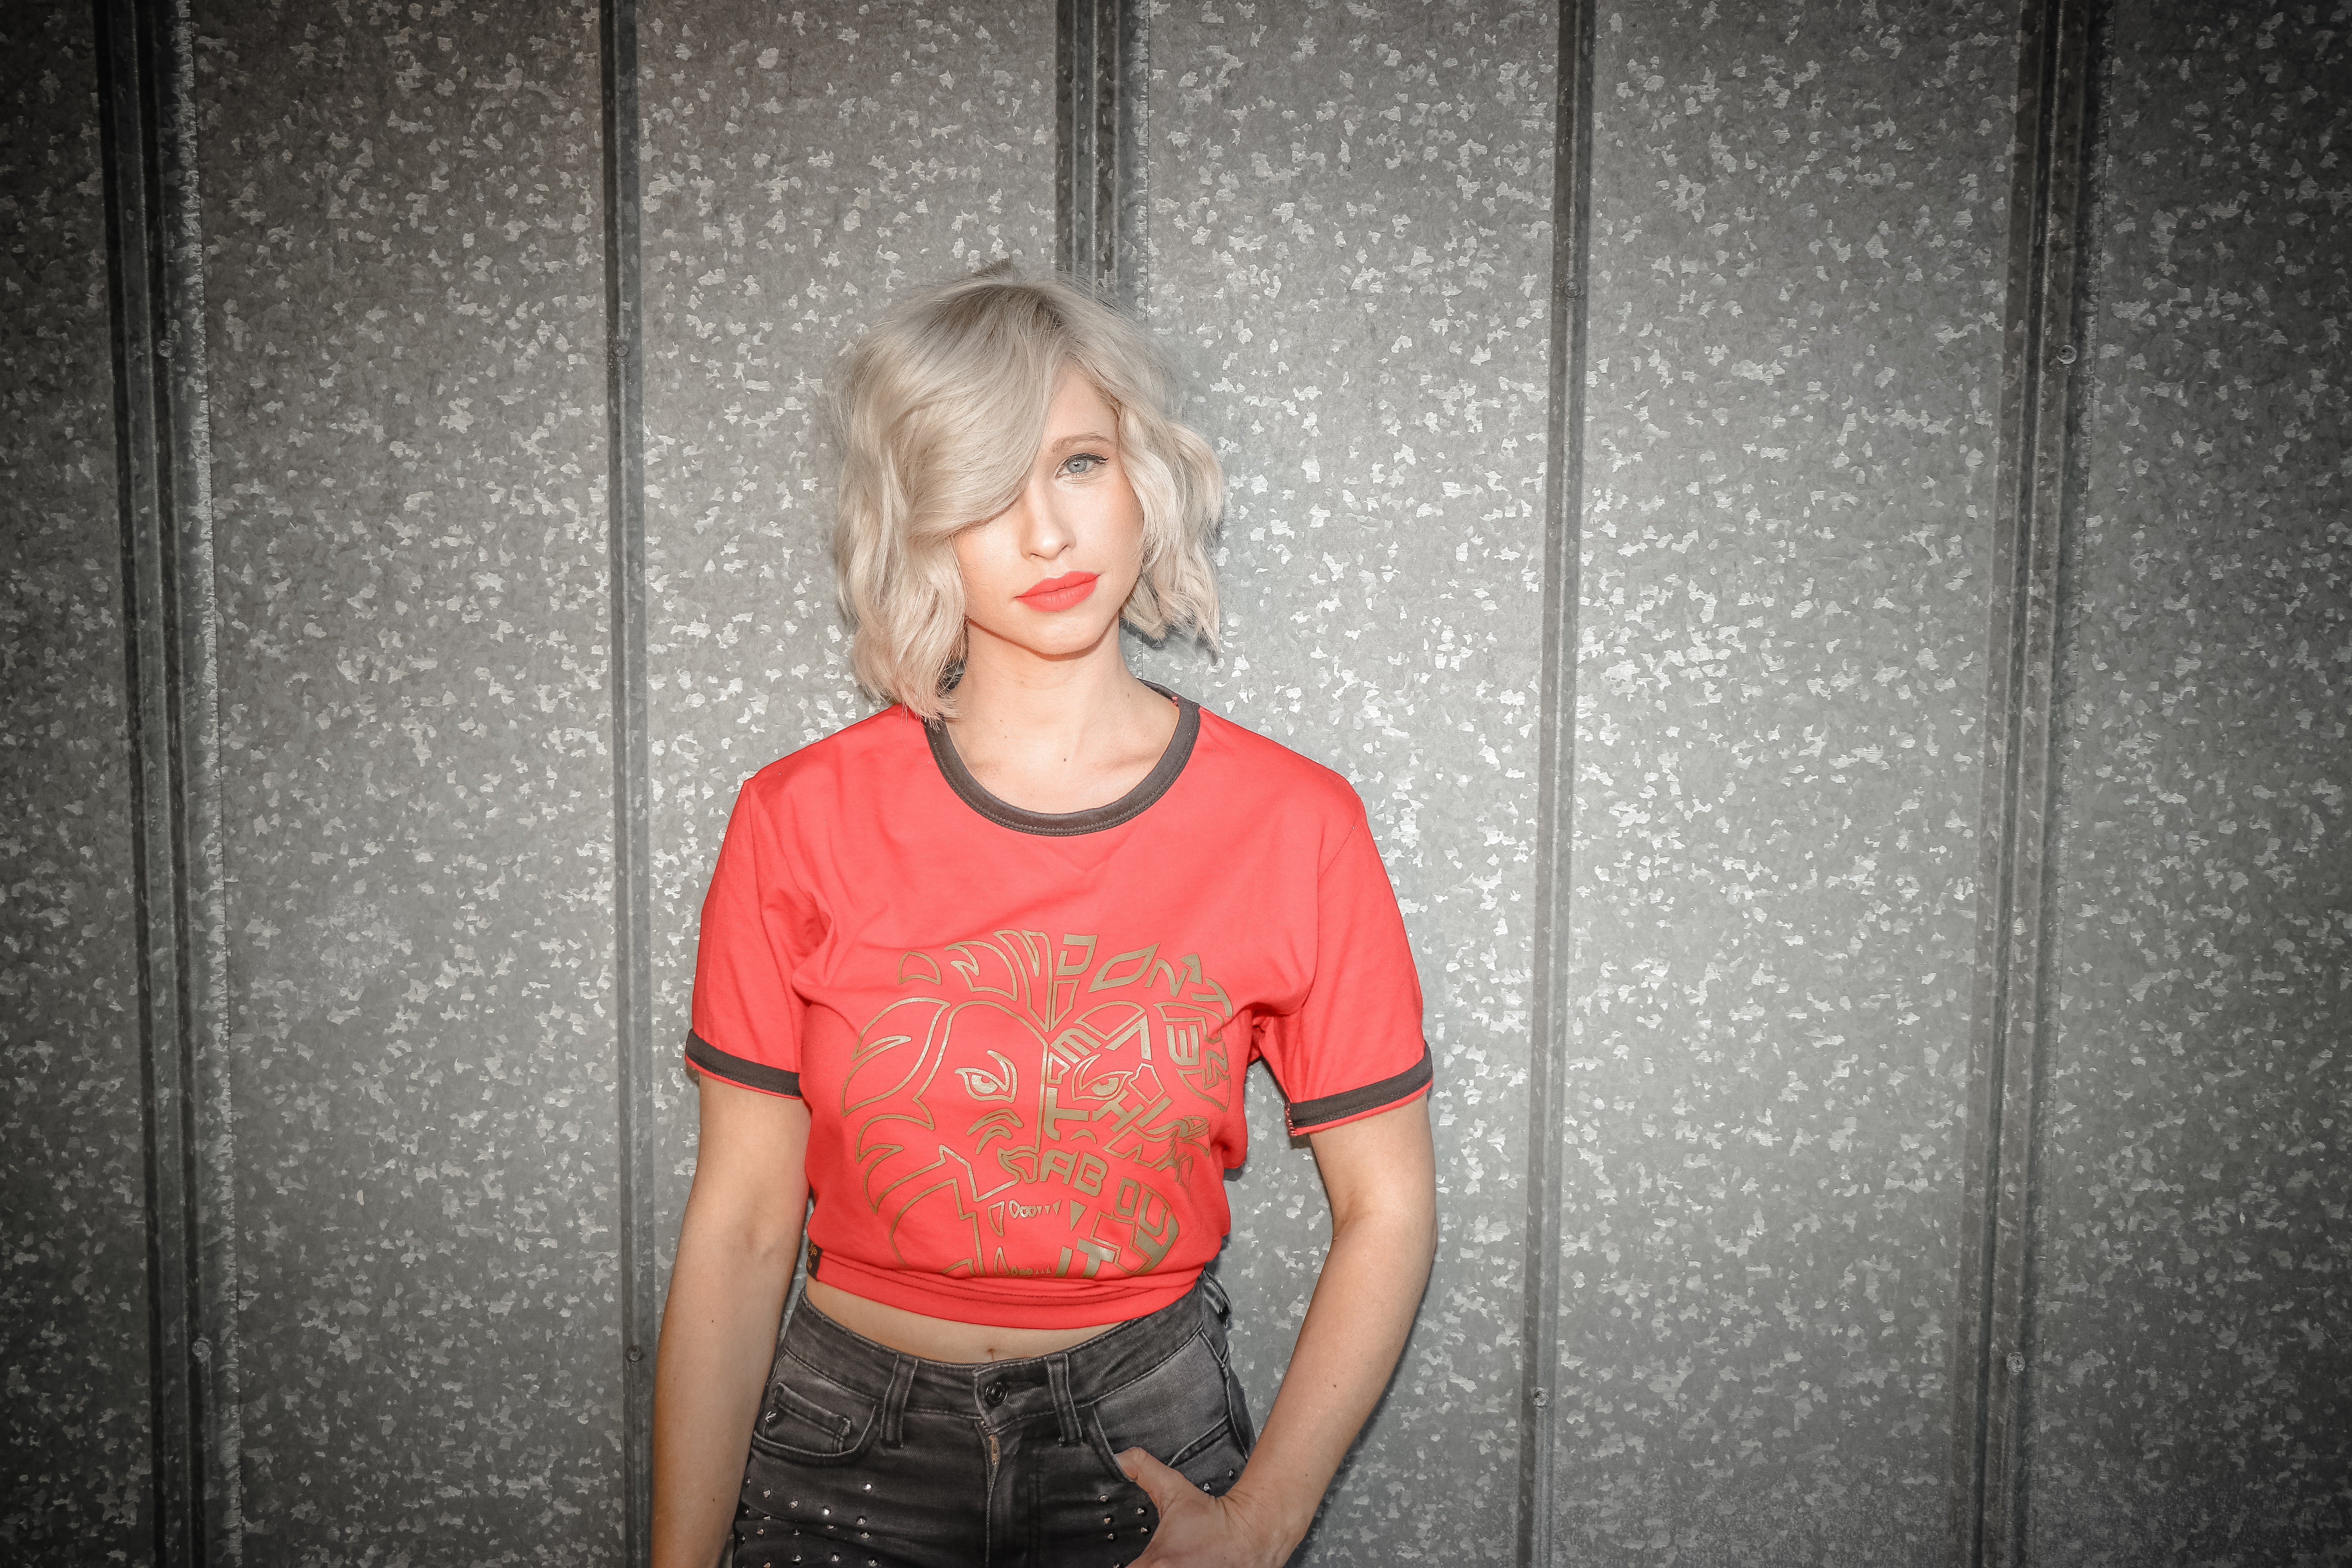 Woman wearing red and gray crew-neck t-shirt photo